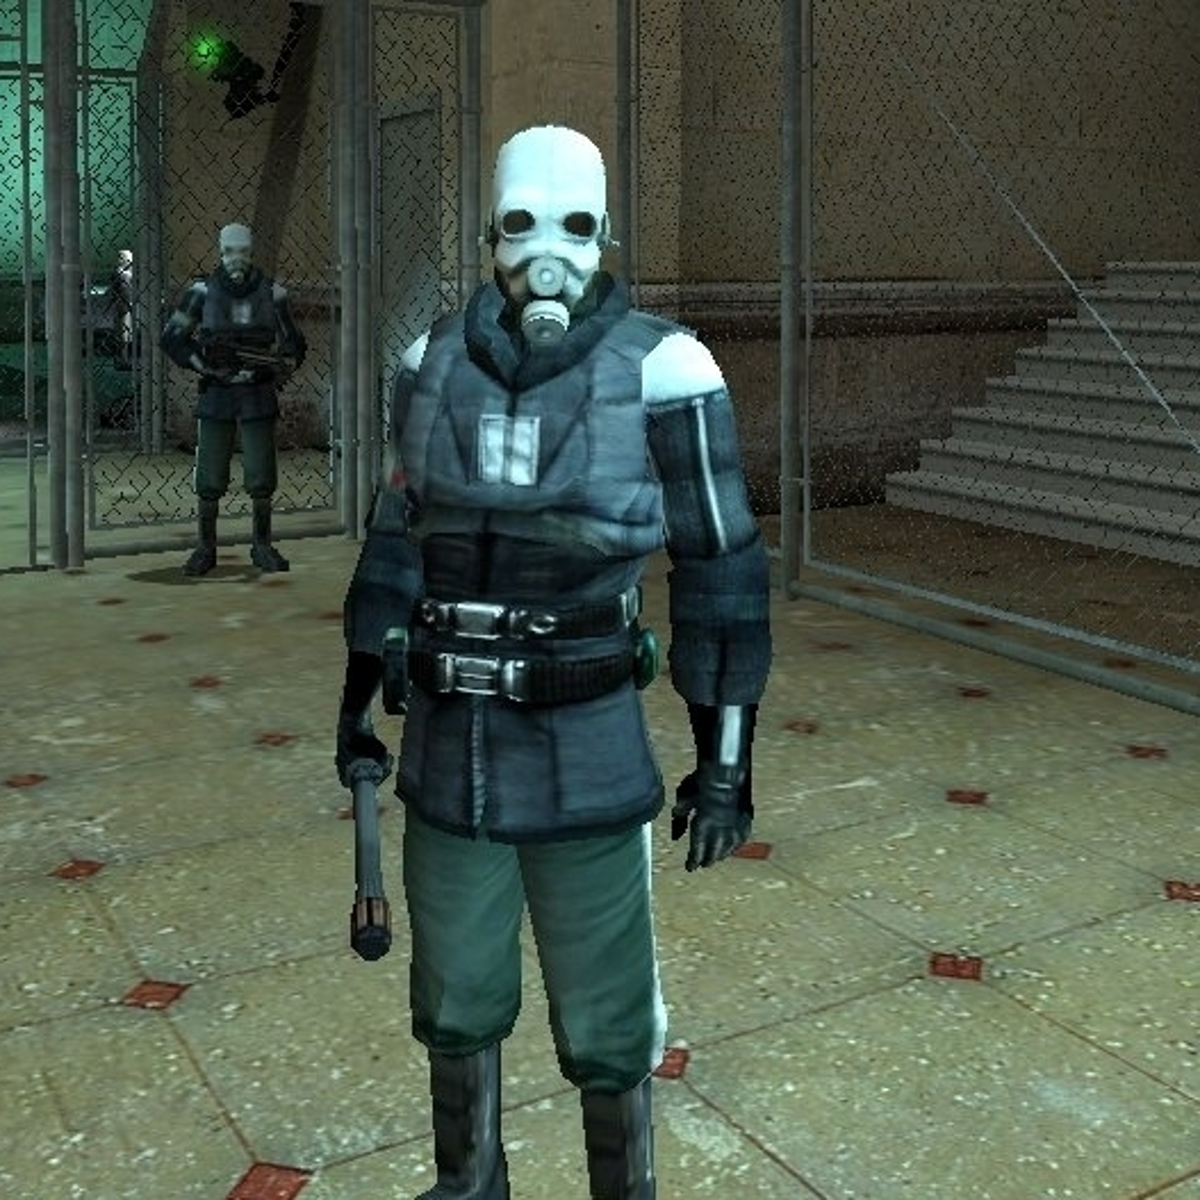 Now modders are using Half-Life: Alyx to get Half-Life 2 working in VR